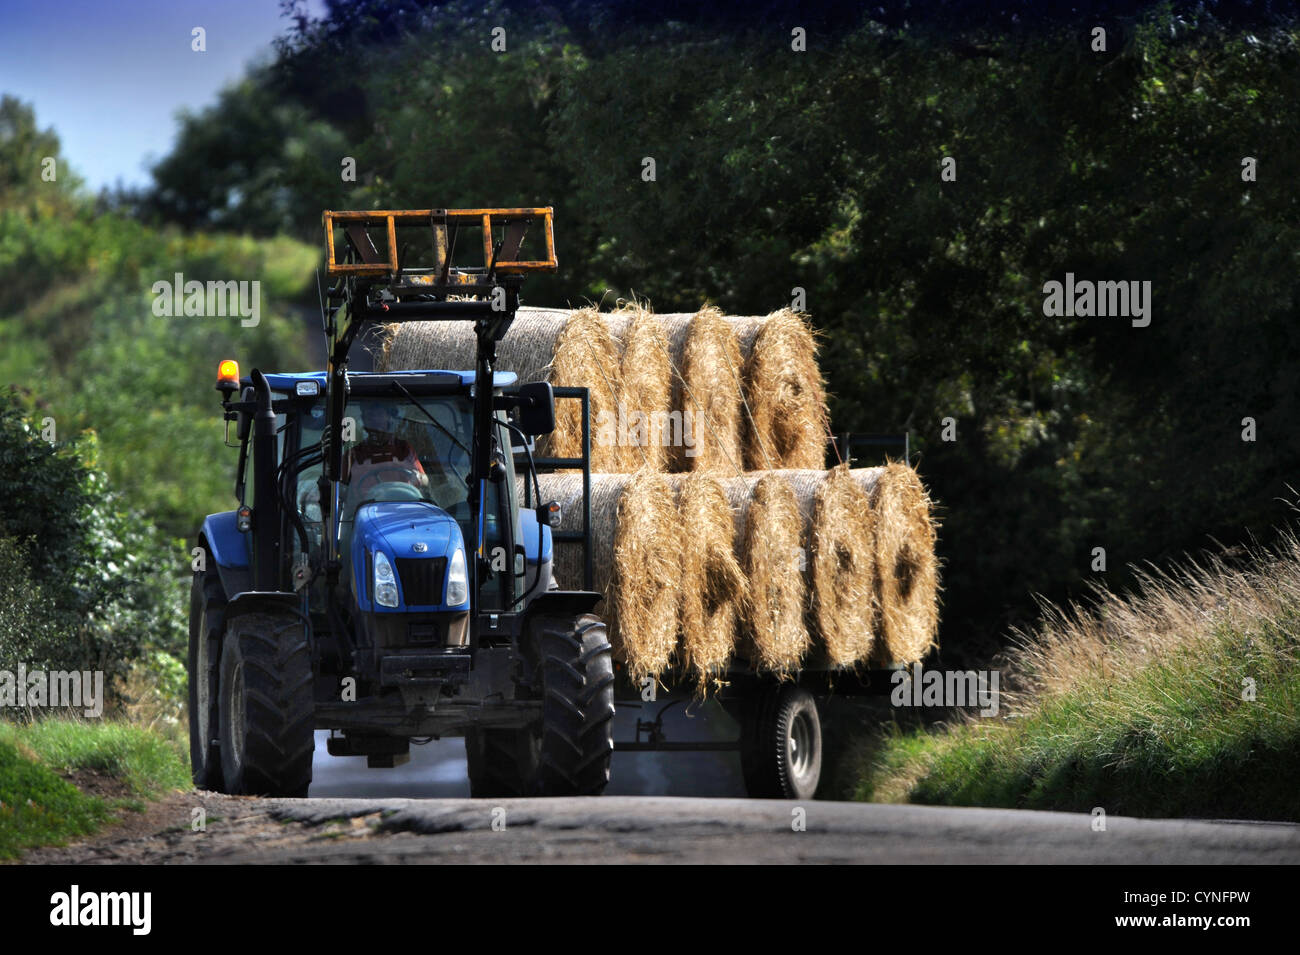 A tractor pulling a trailer of hay bales in Gloucestershire UK Stock Photo